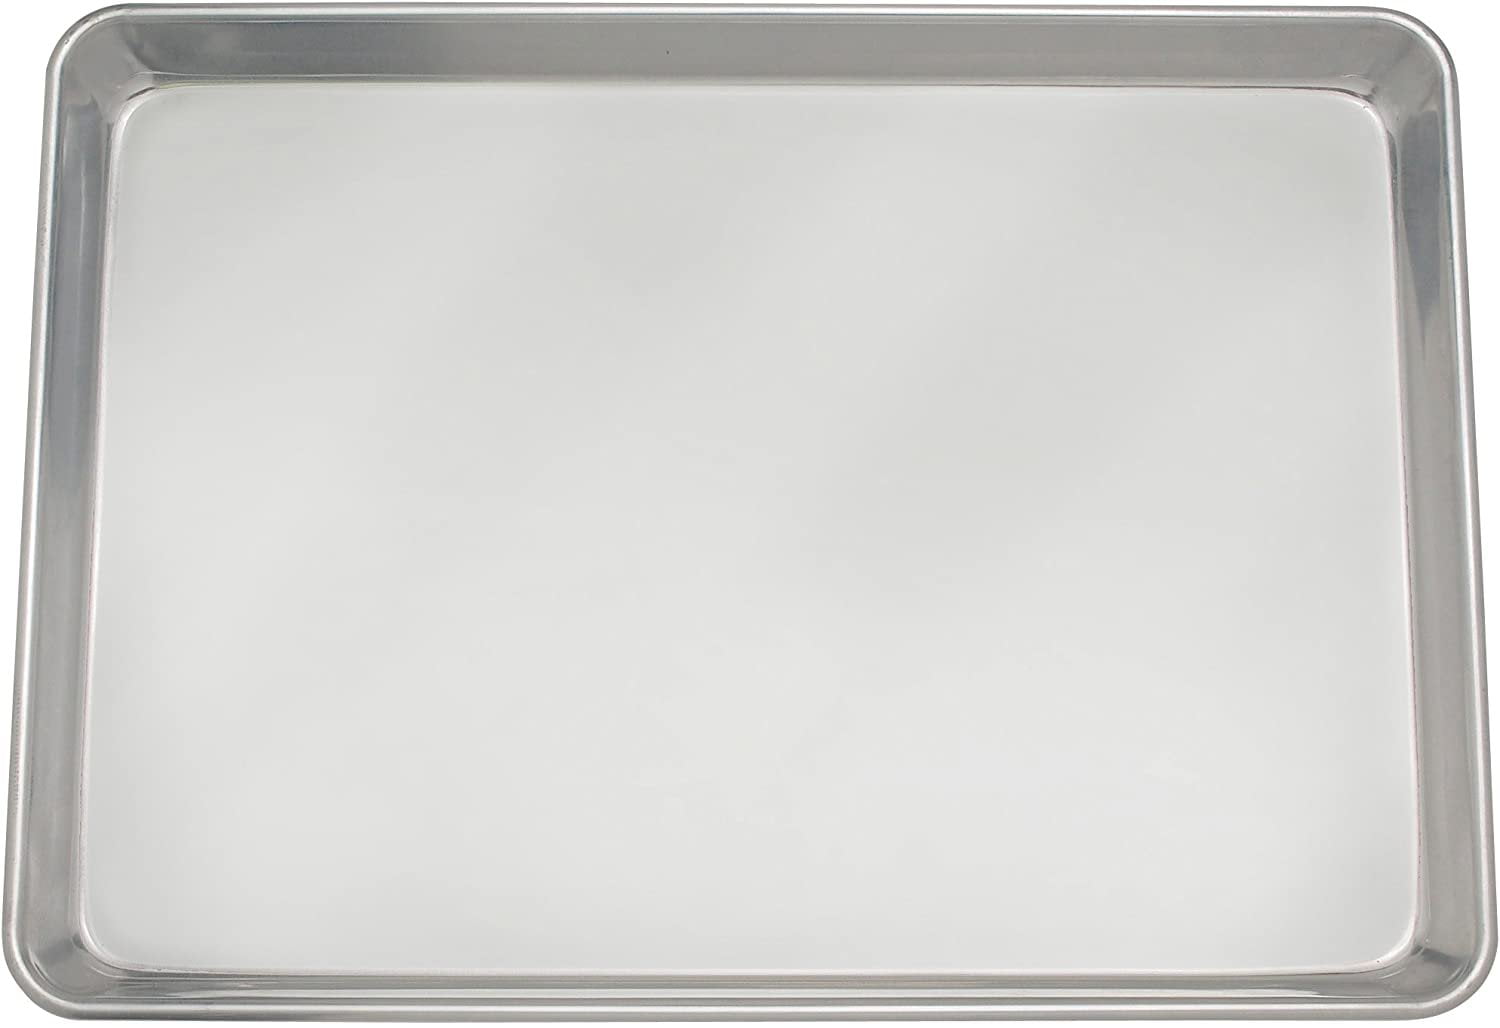 Mrs. Anderson's Baking Jelly Roll Pan, 10.25-Inches x 15.25-Inches,  Heavyweight Commercial Grade 19-Gauge Aluminum